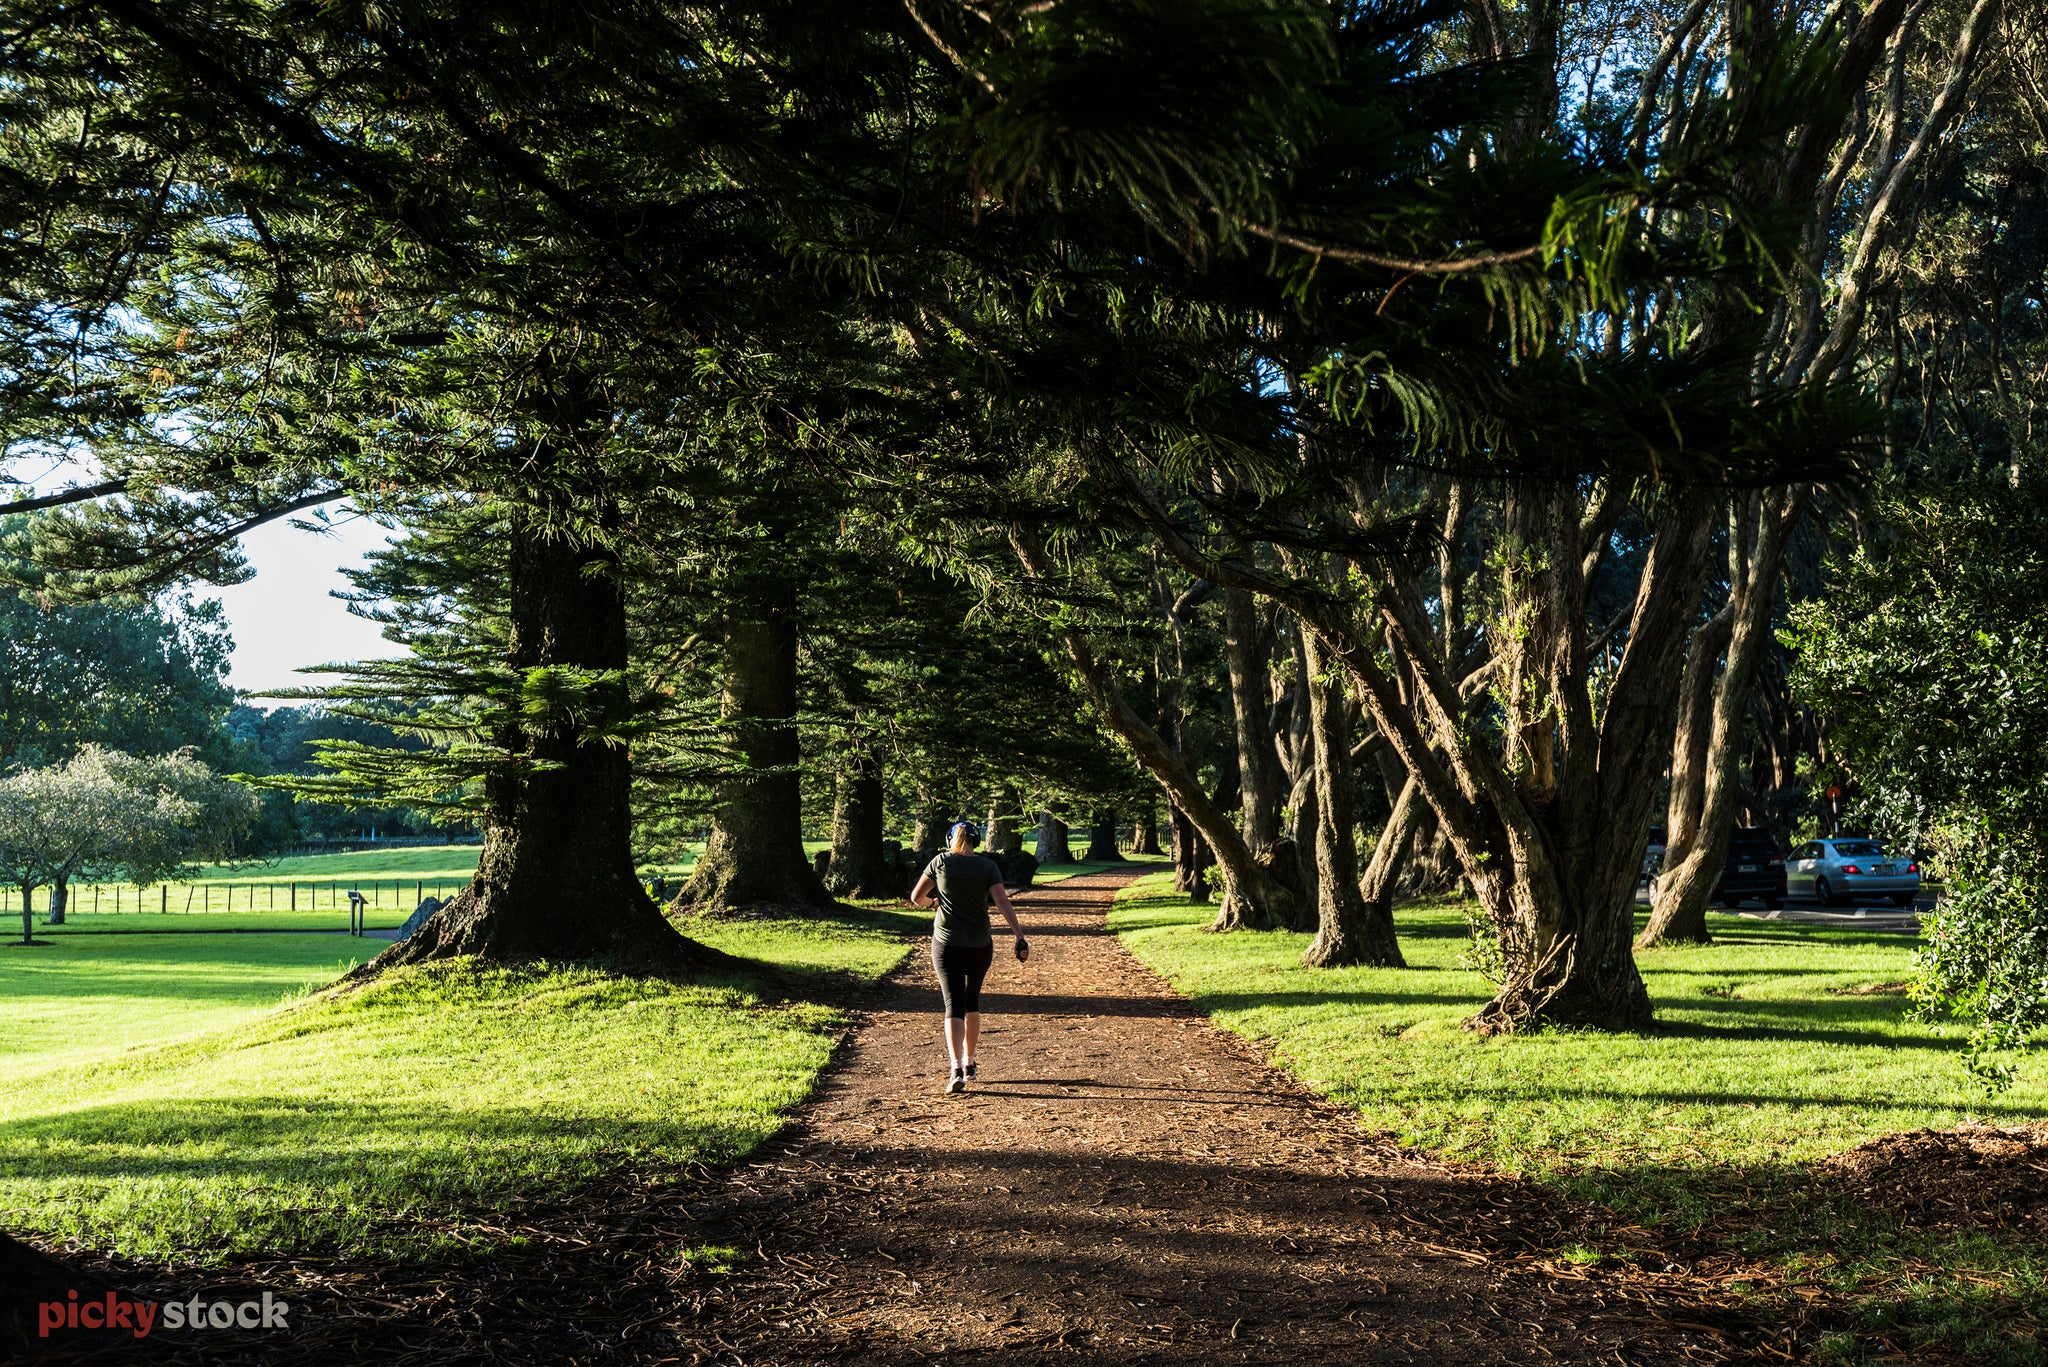 Cornwall Park/One Tree Hill